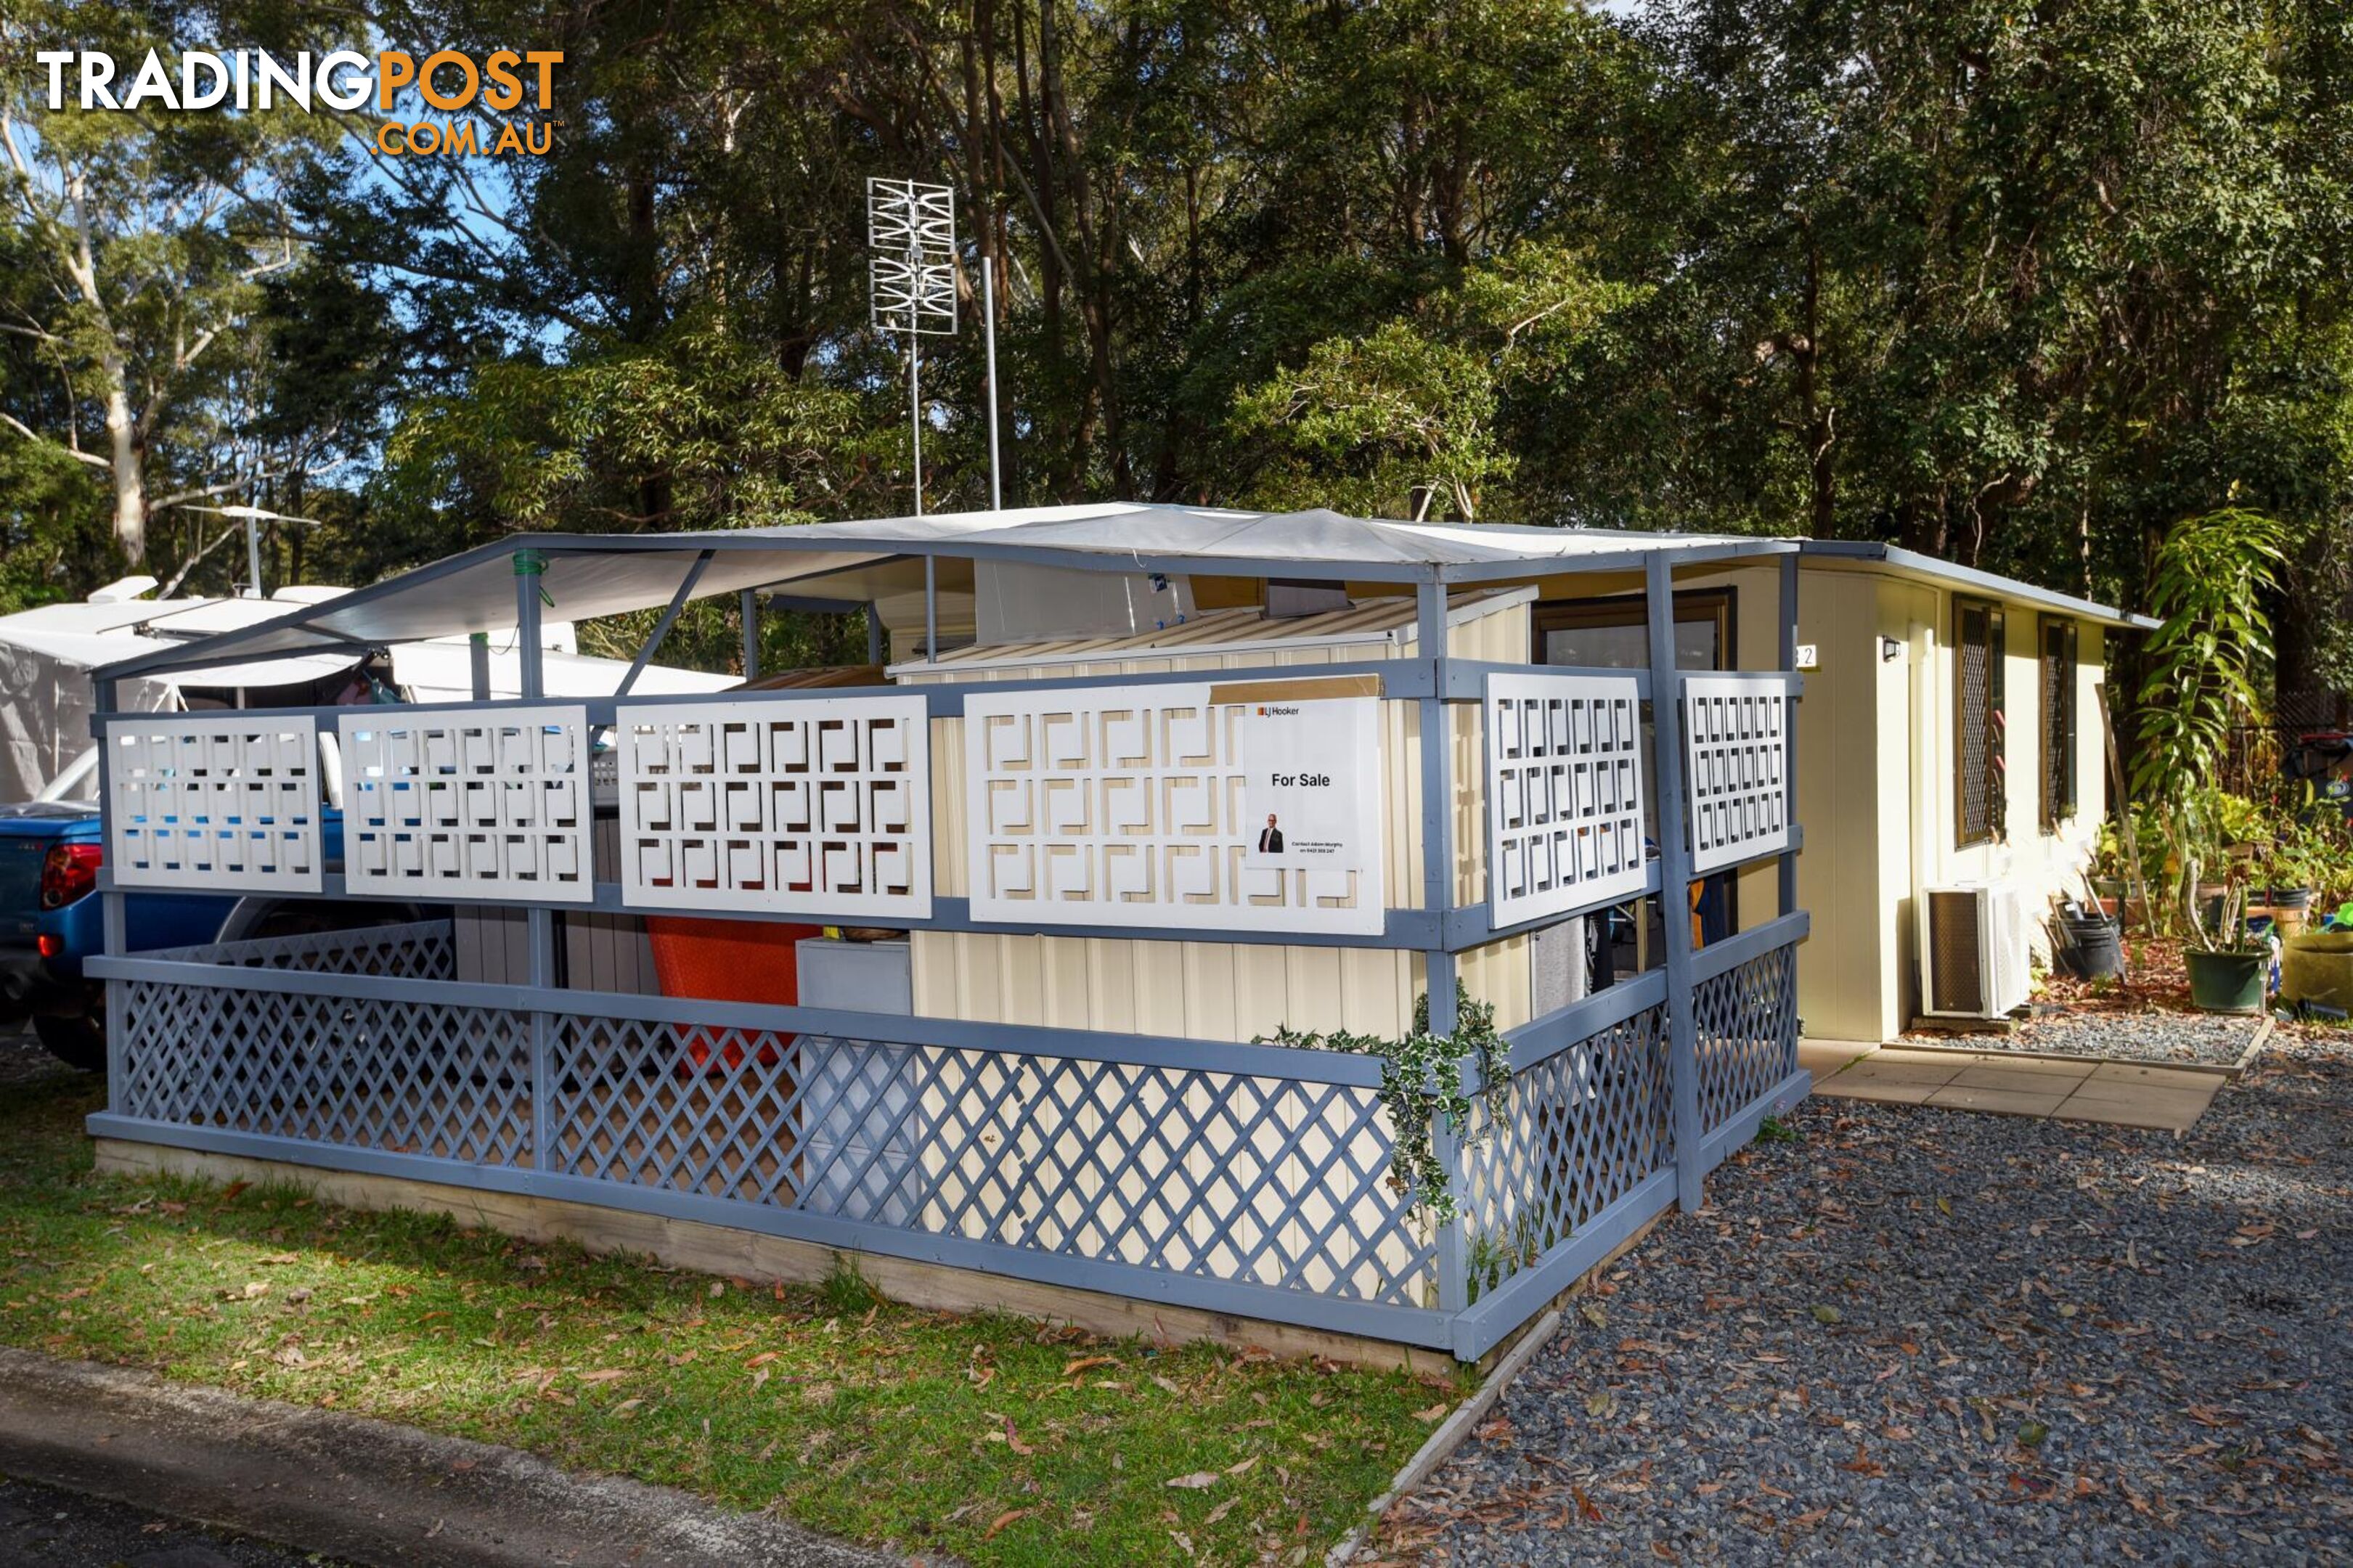 32/123 Pacific Highway COFFS HARBOUR NSW 2450